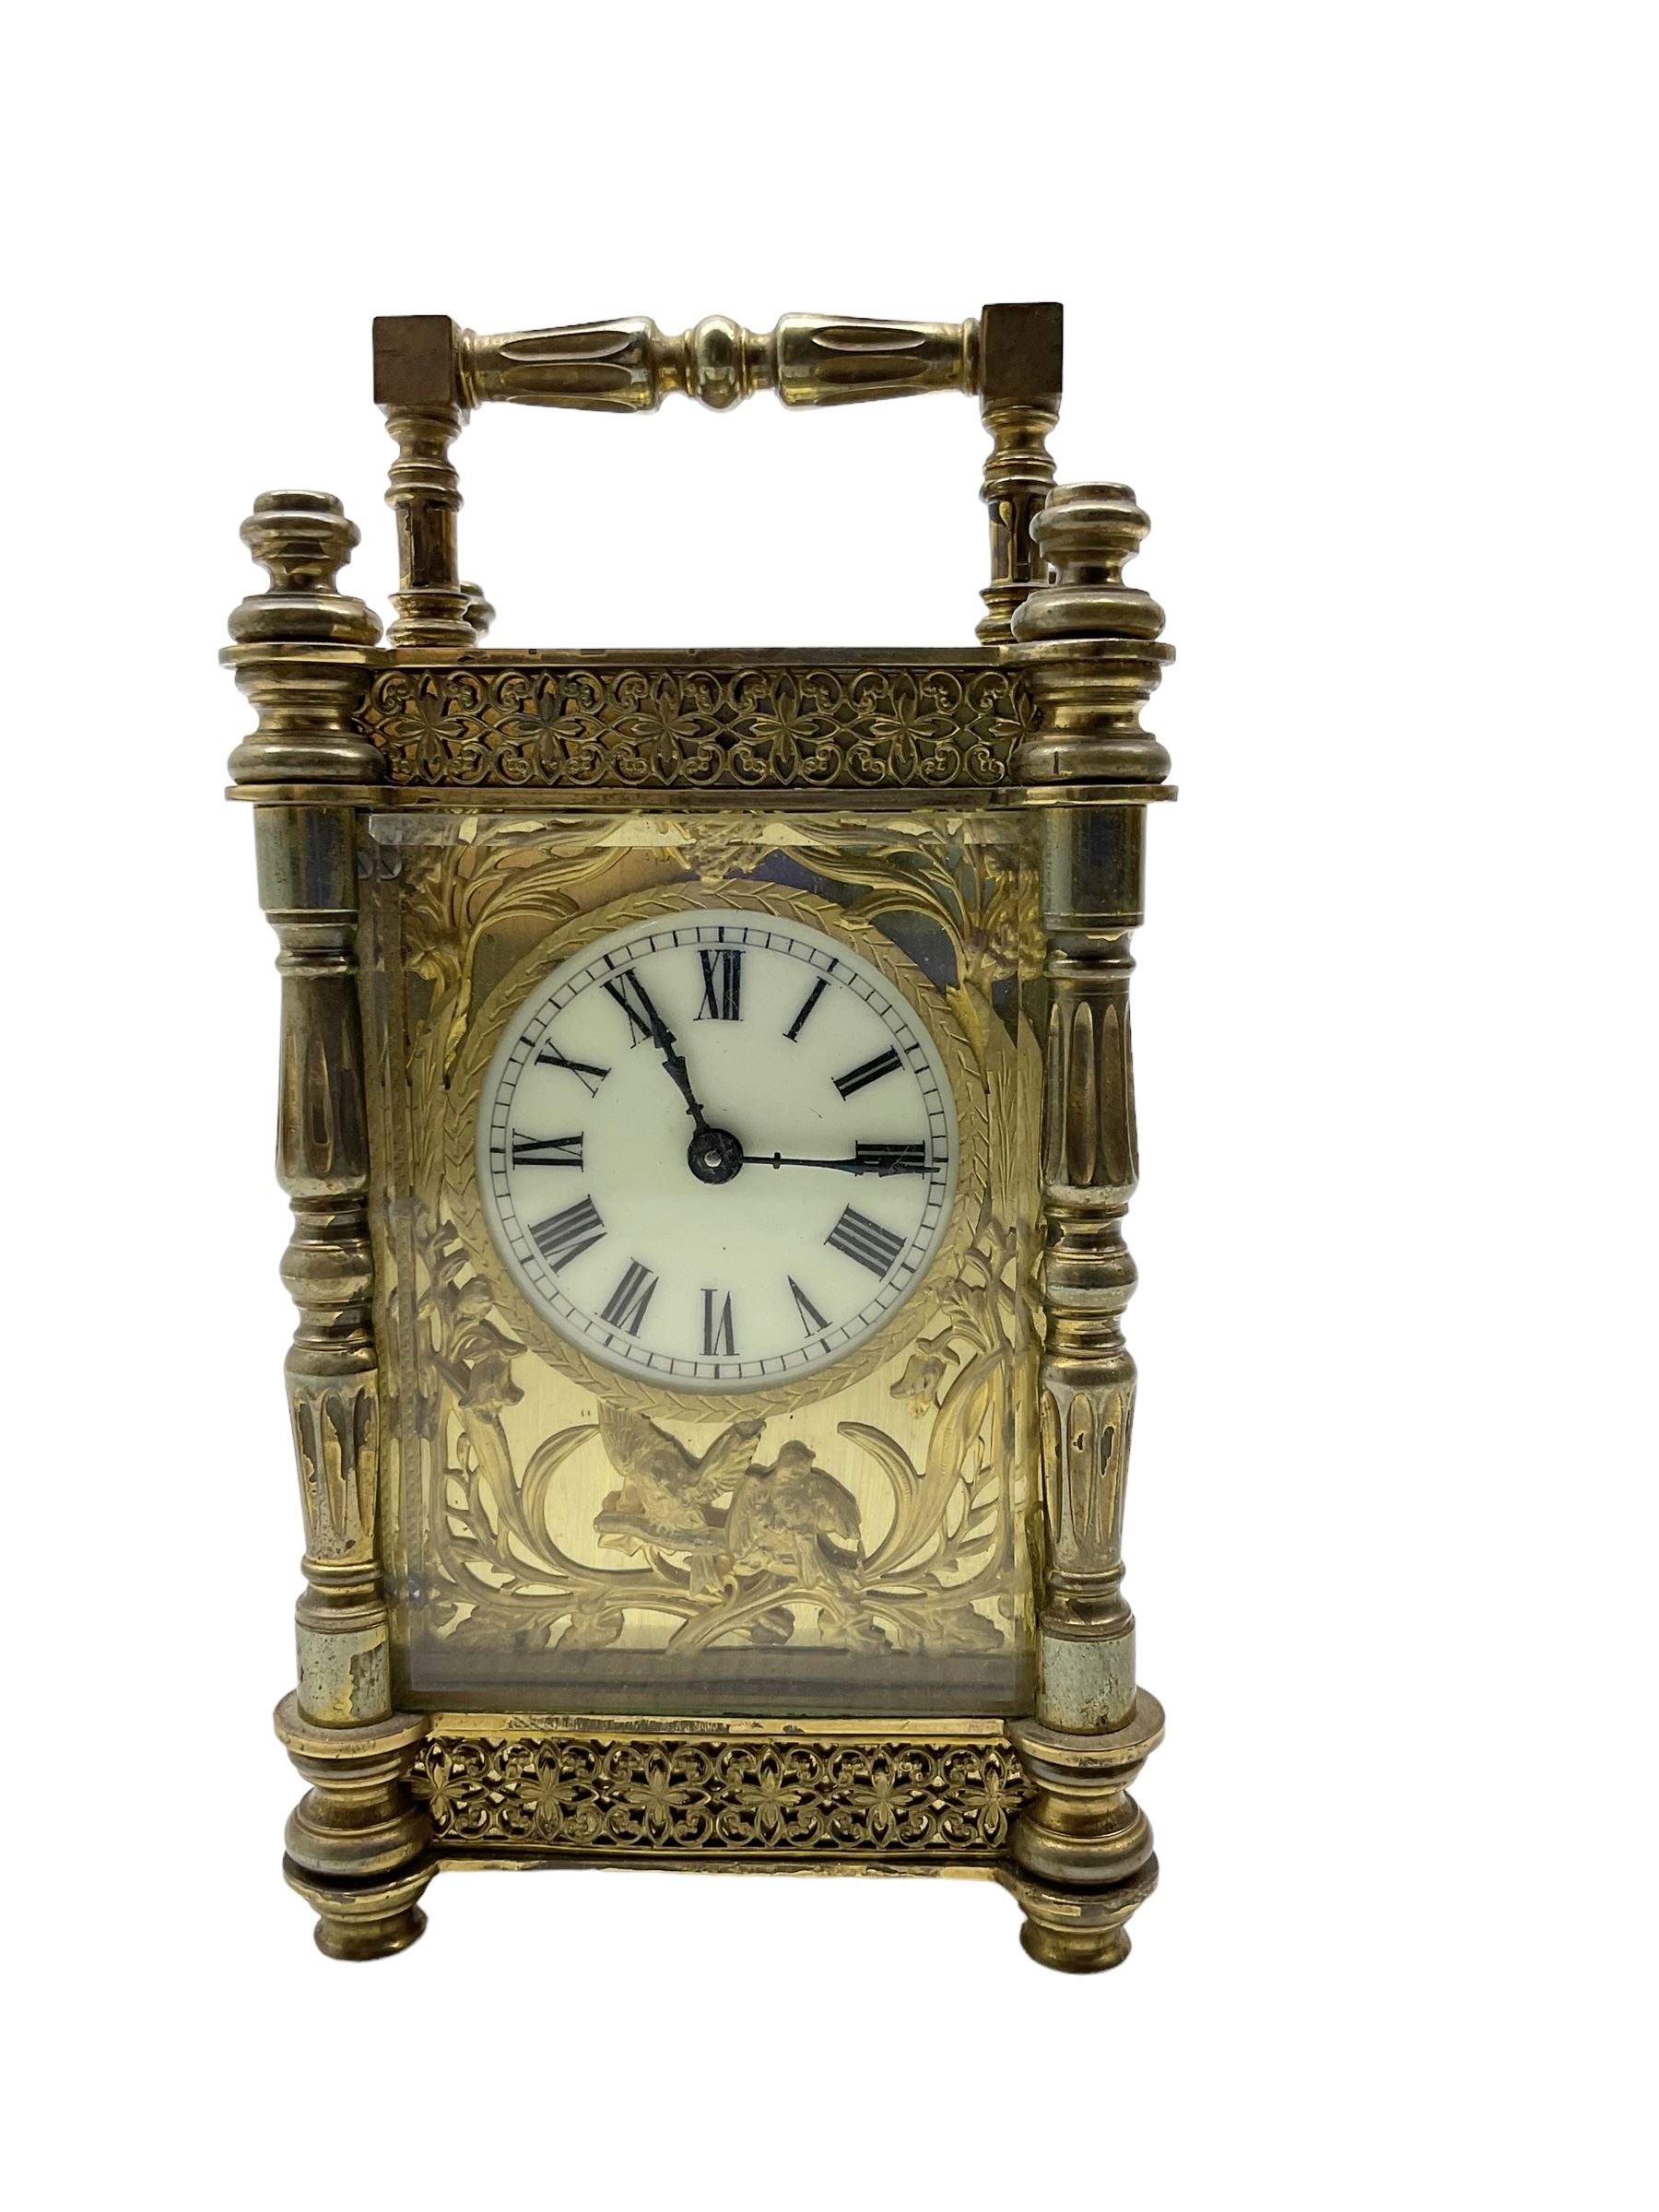 French - Edwardian timepiece 8-day carriage clock c1910 with a decorative case cast finished in high